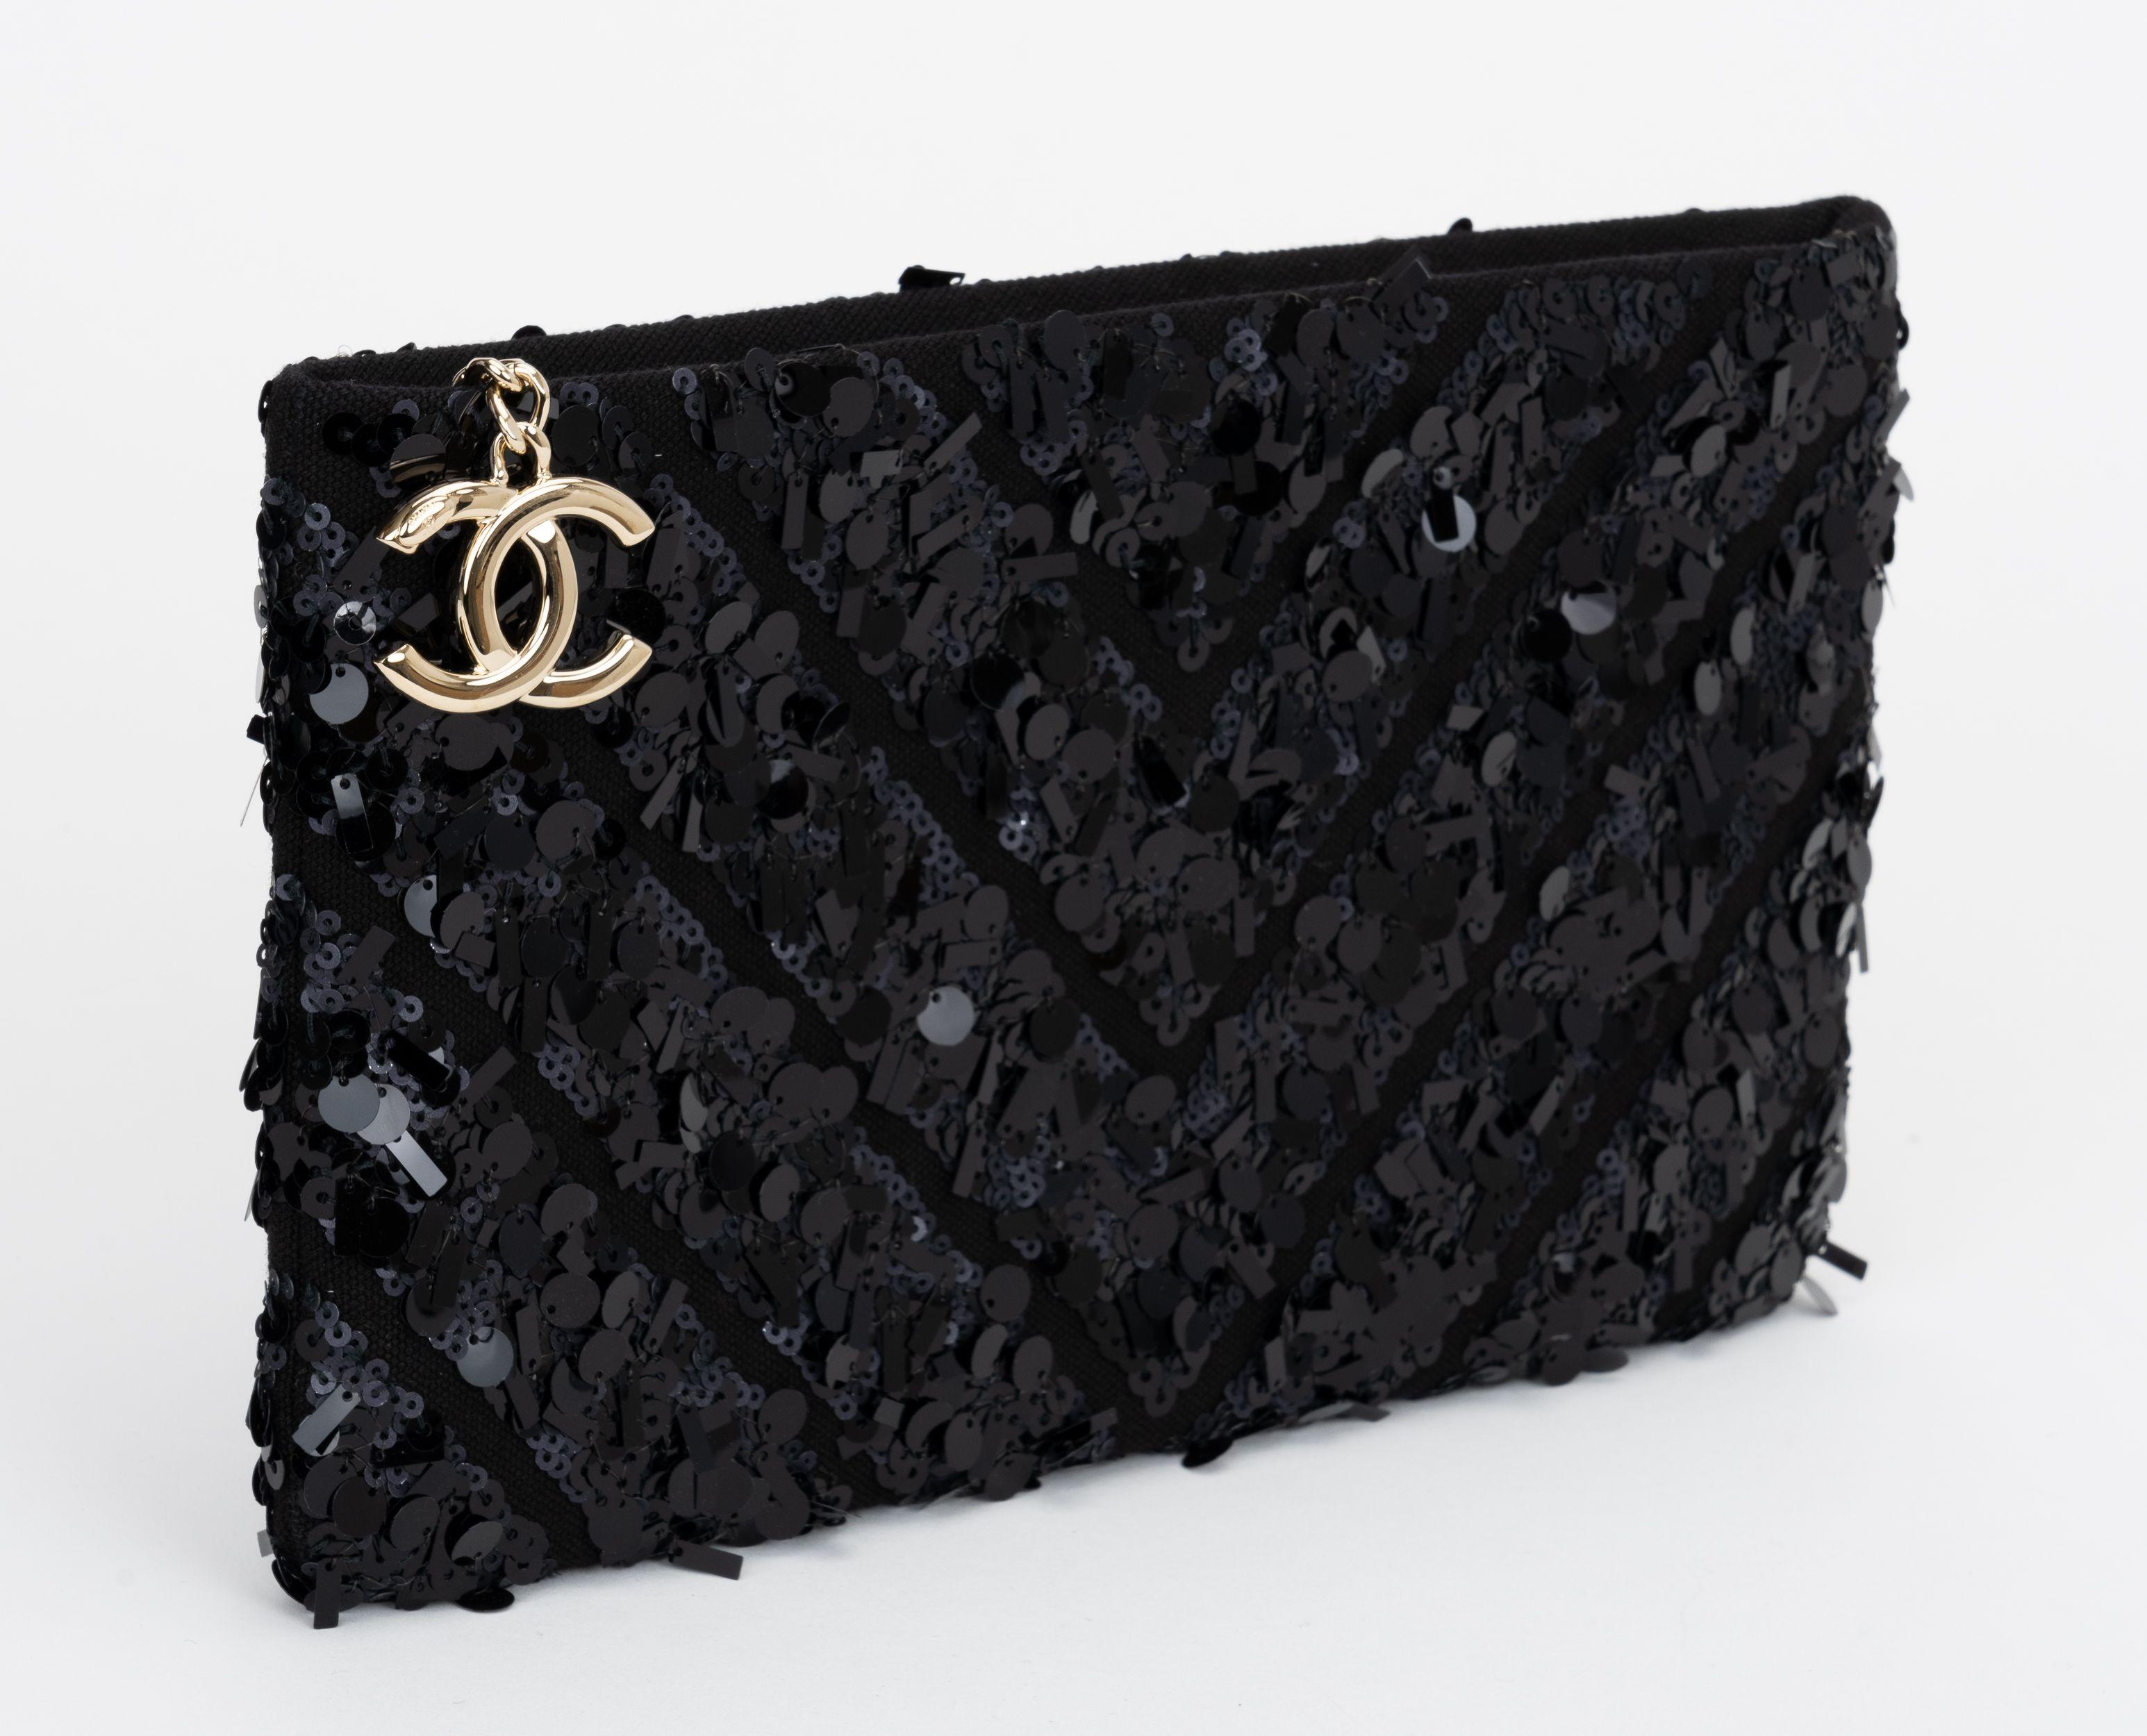 Chanel chic and timeless black sequins evening clutch, silver logo zipper pull, leather lining.  Comes with hologram, id card and original dust cover. Collection 25.